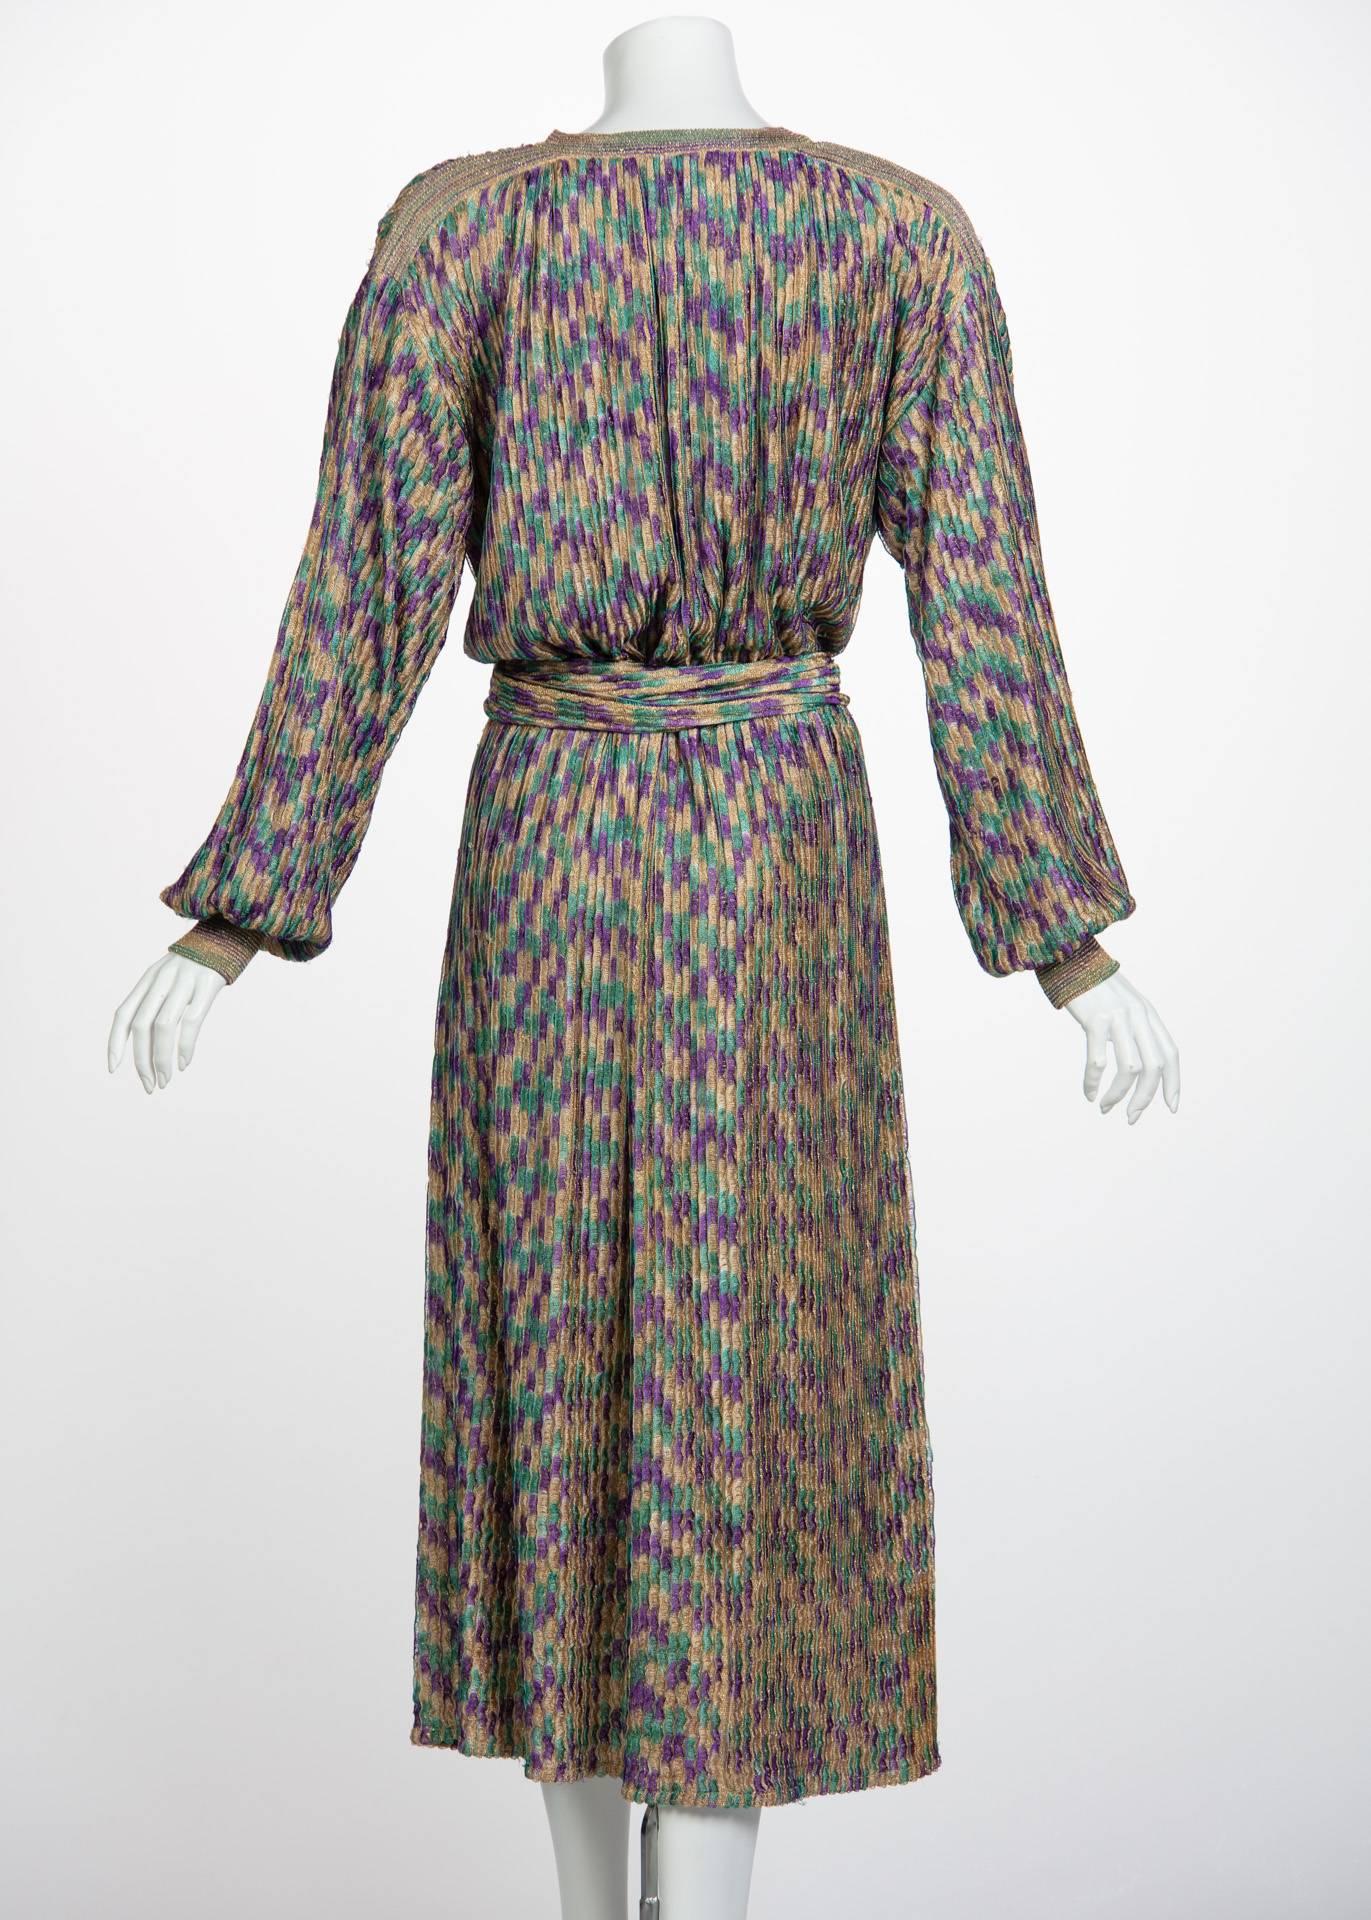 Missoni Multicolored Jewel Tone Metallic Knit Belted Dress, 1970s  In Excellent Condition For Sale In Boca Raton, FL